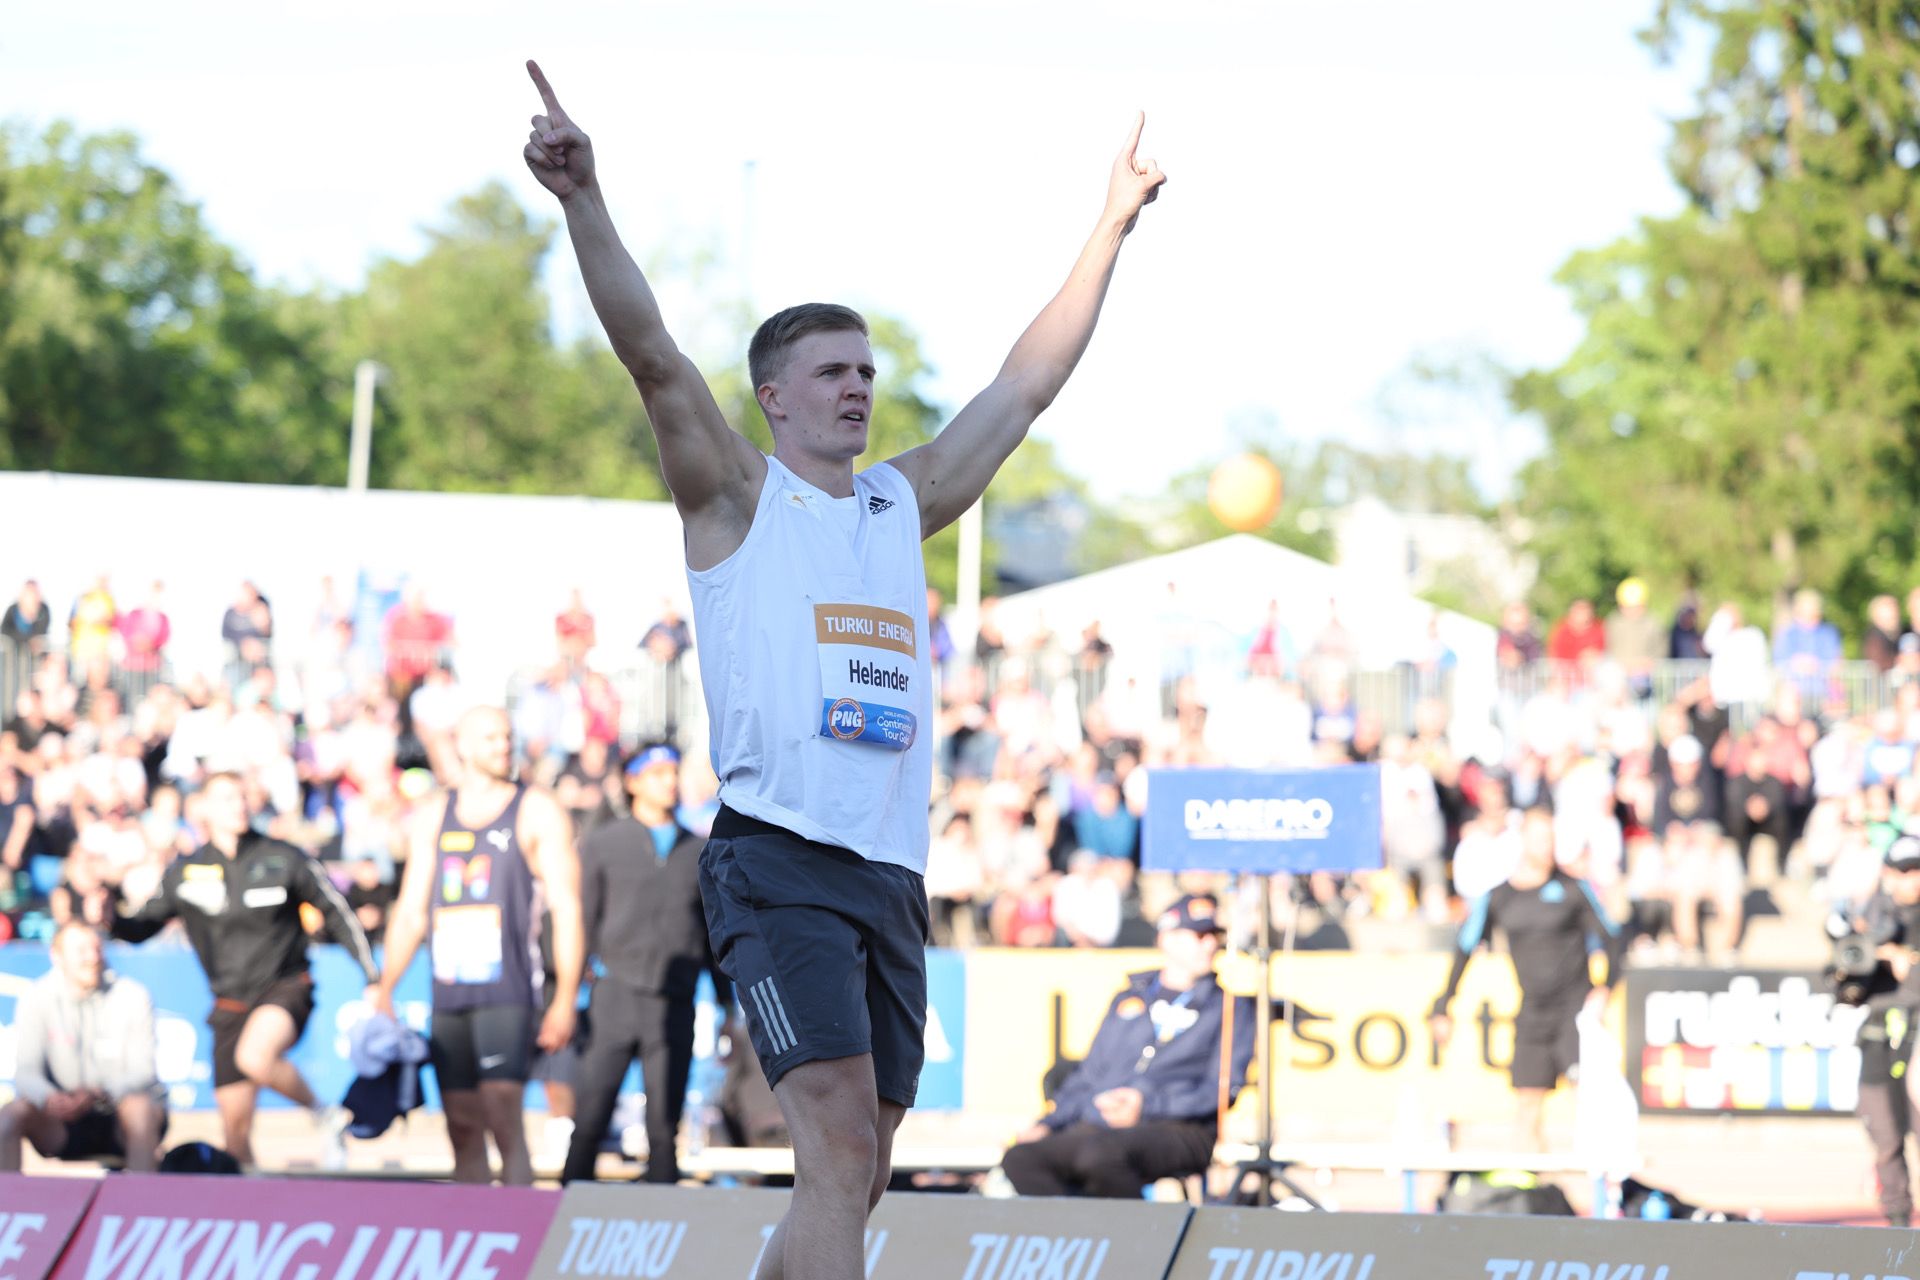 Oliver Helander celebrates his javelin performance at the Continental Tour Gold meeting in Turku